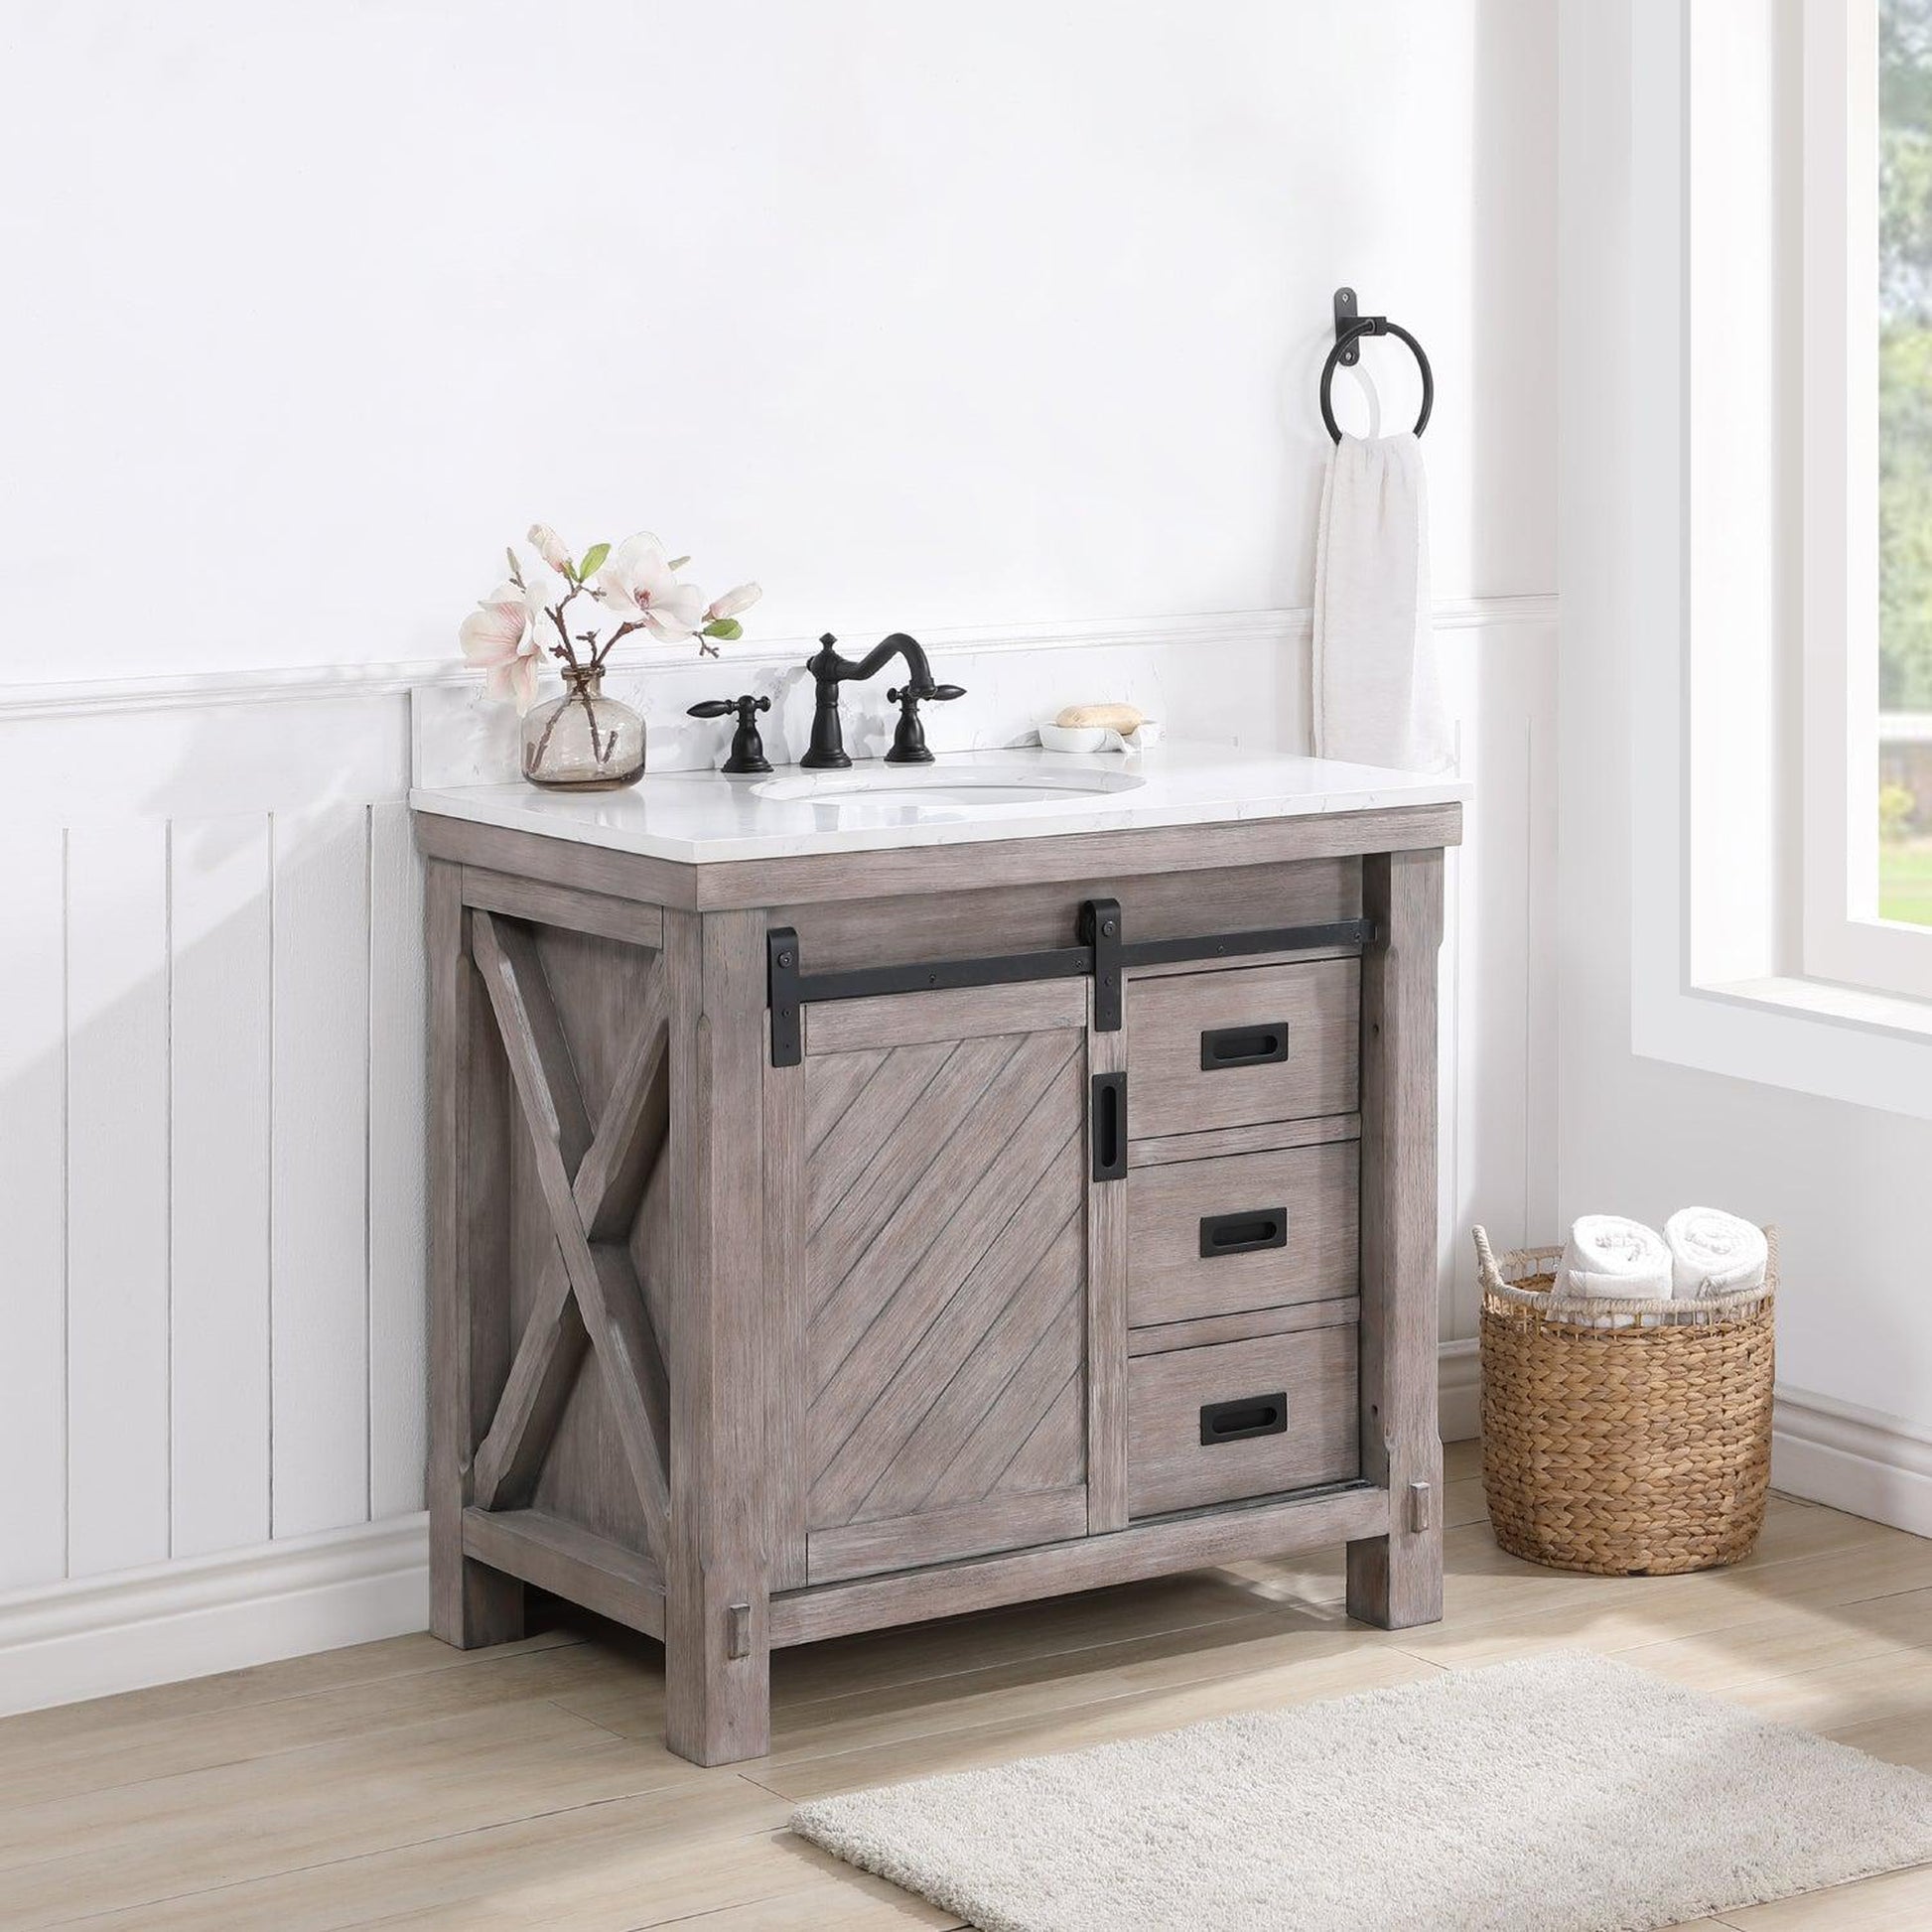 Vinnova Cortes 36" Single Sink Bath Vanity In Classical Grey Finish With White Composite Countertop